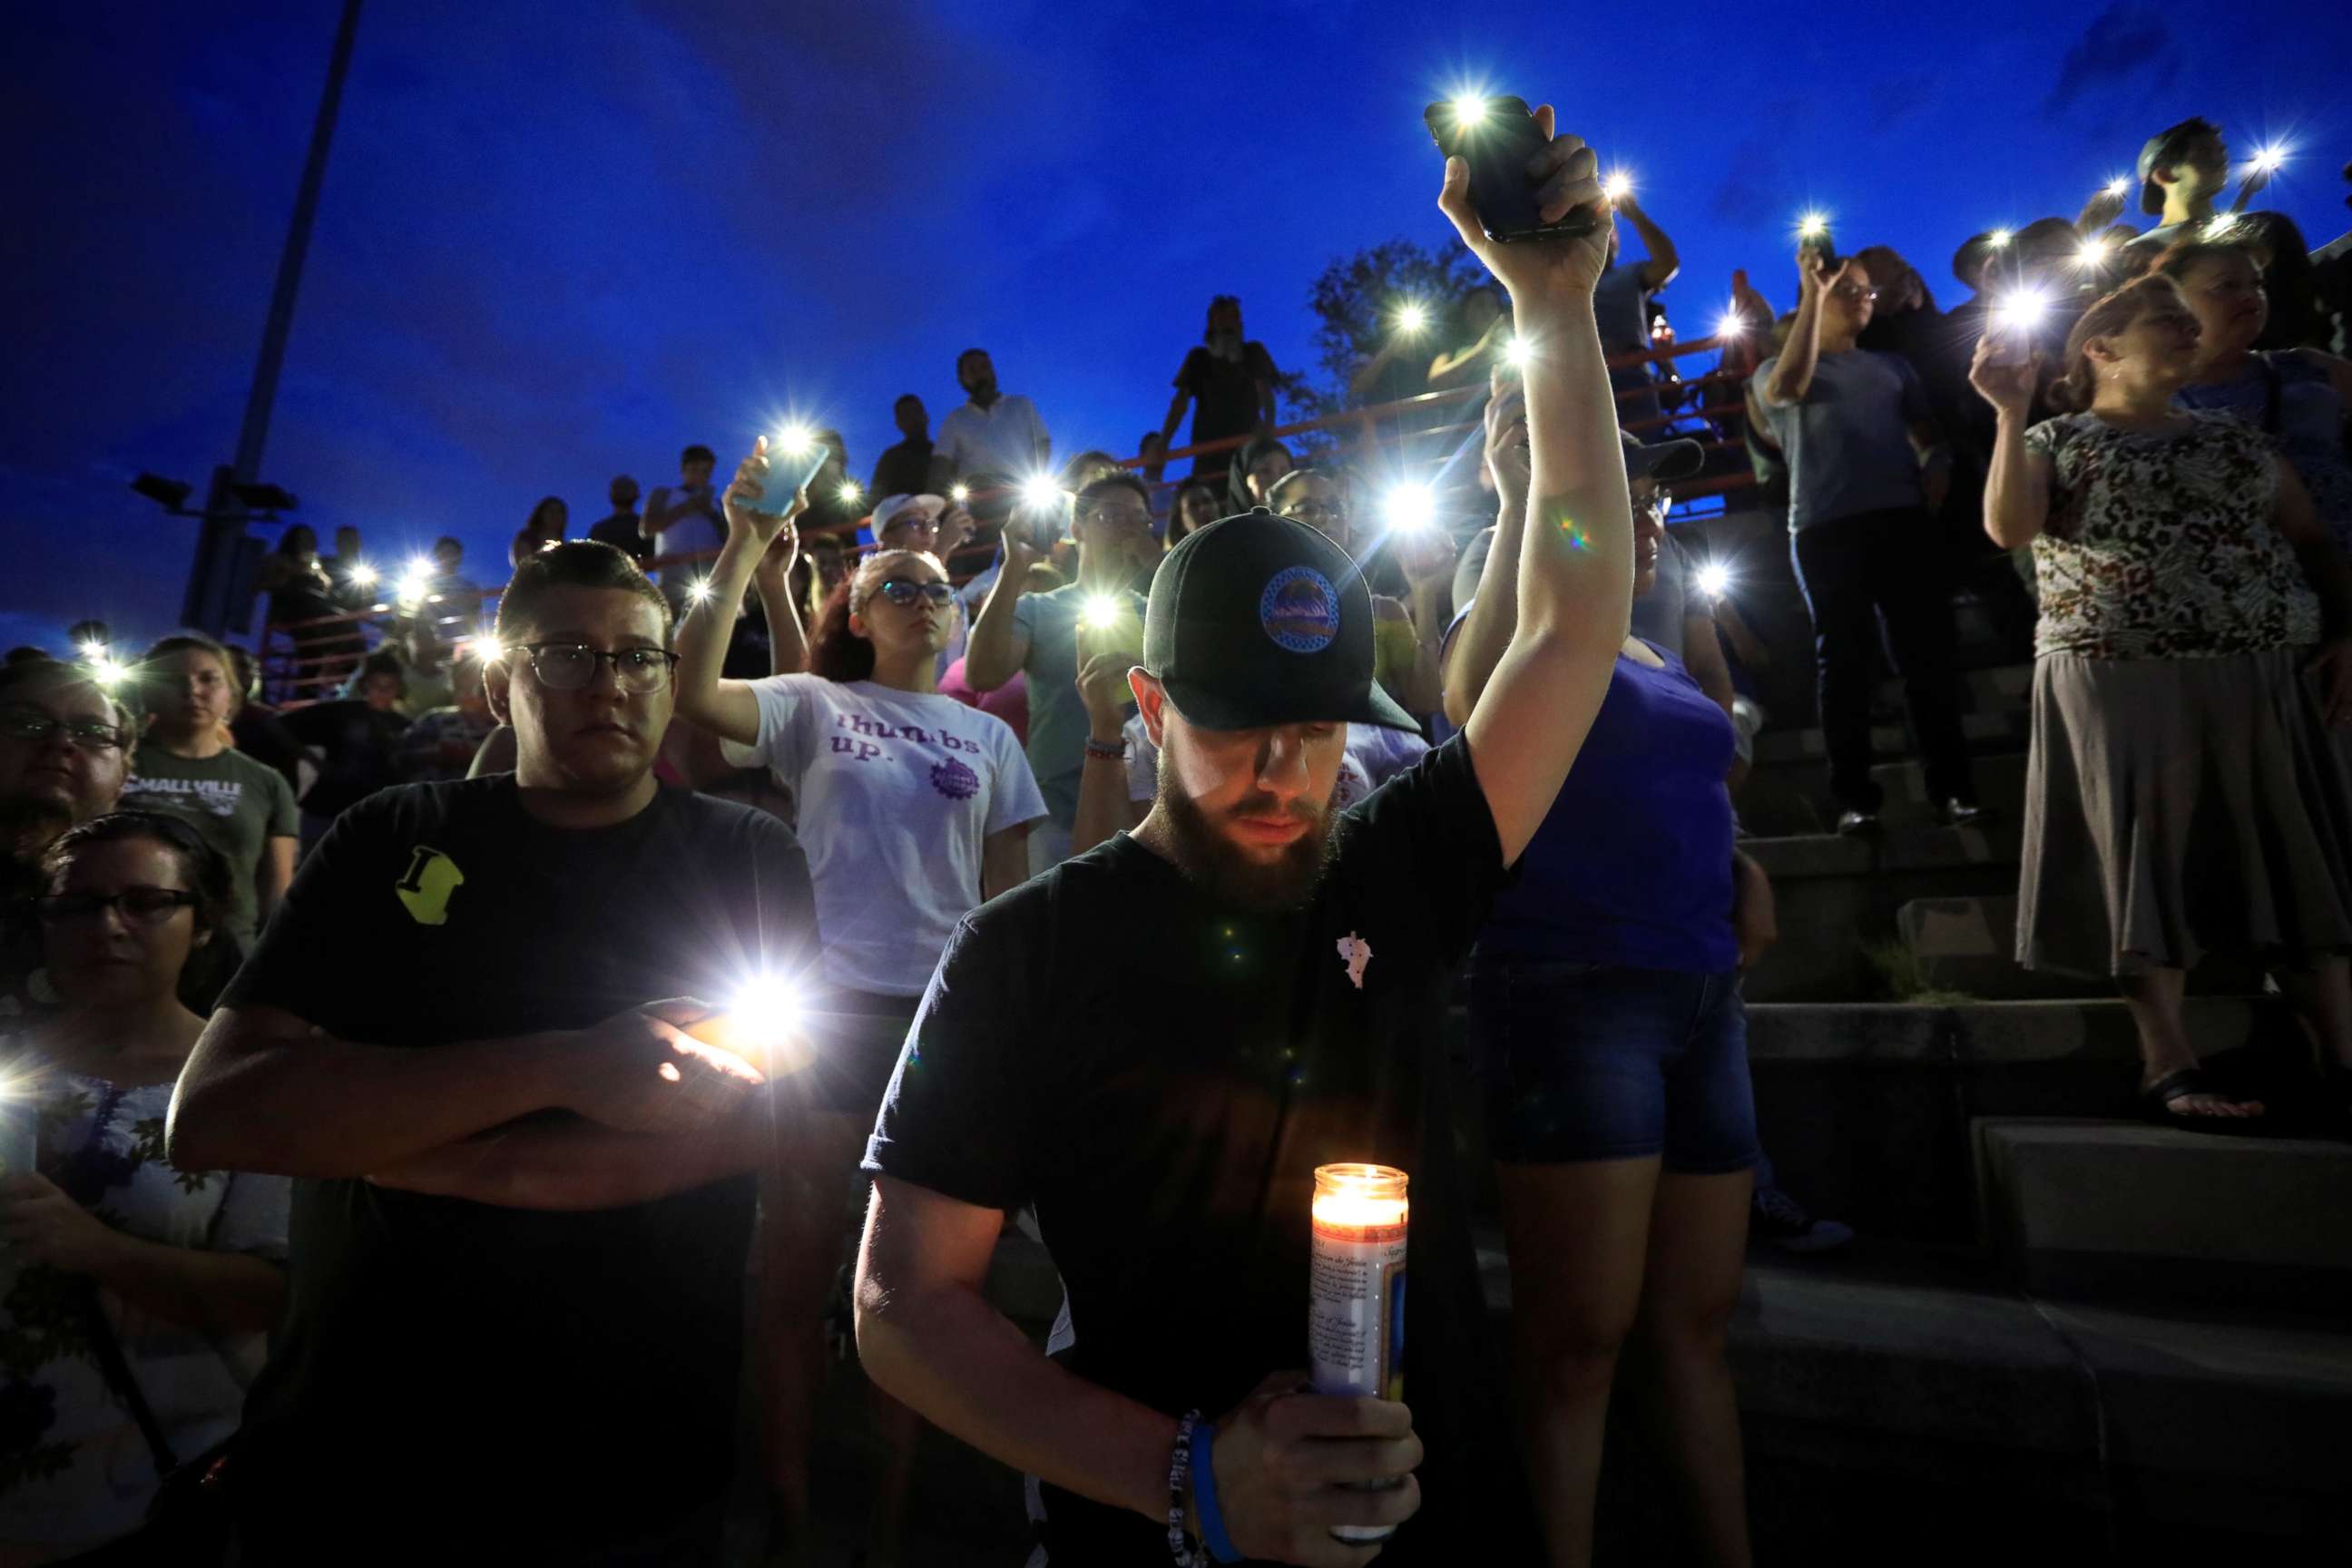 PHOTO: Francisco Castaneda joins mourners taking part in a vigil at El Paso High School after a mass shooting at a Walmart store in El Paso, Texas, U.S. August 3, 2019. REUTERS/Jorge Salgado NO RESALES. NO ARCHIVES.